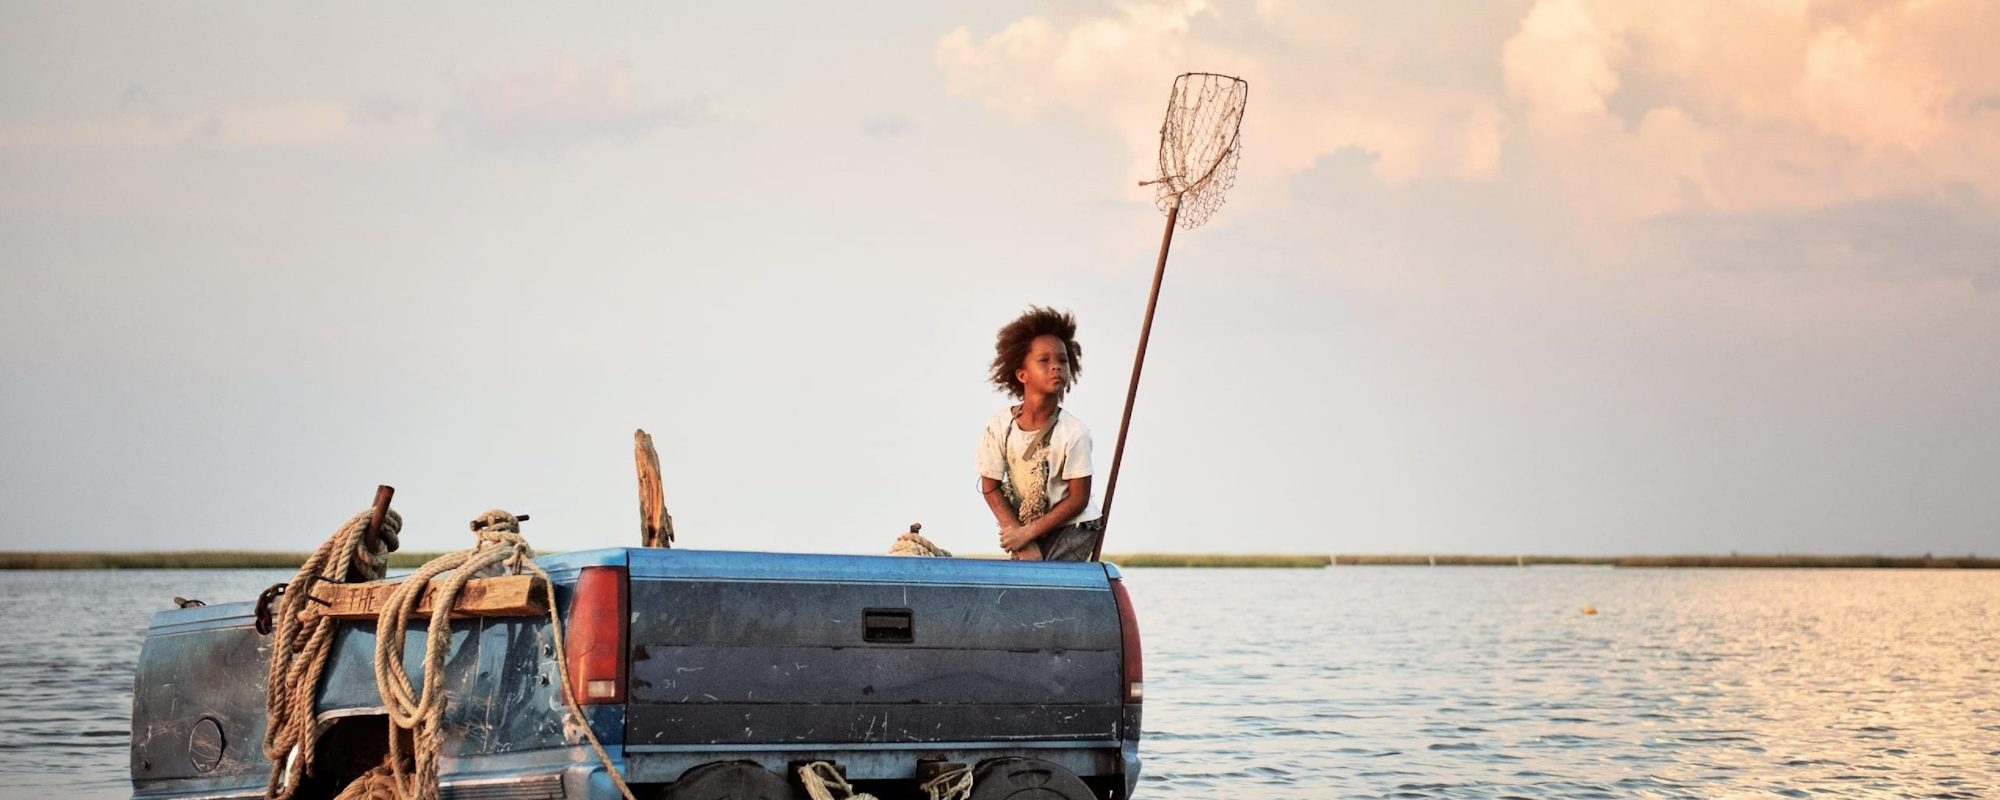 A young girl rides the back of a truck like a boat, through a mass of water, with a fishing net next to her, poking up into the sky. 